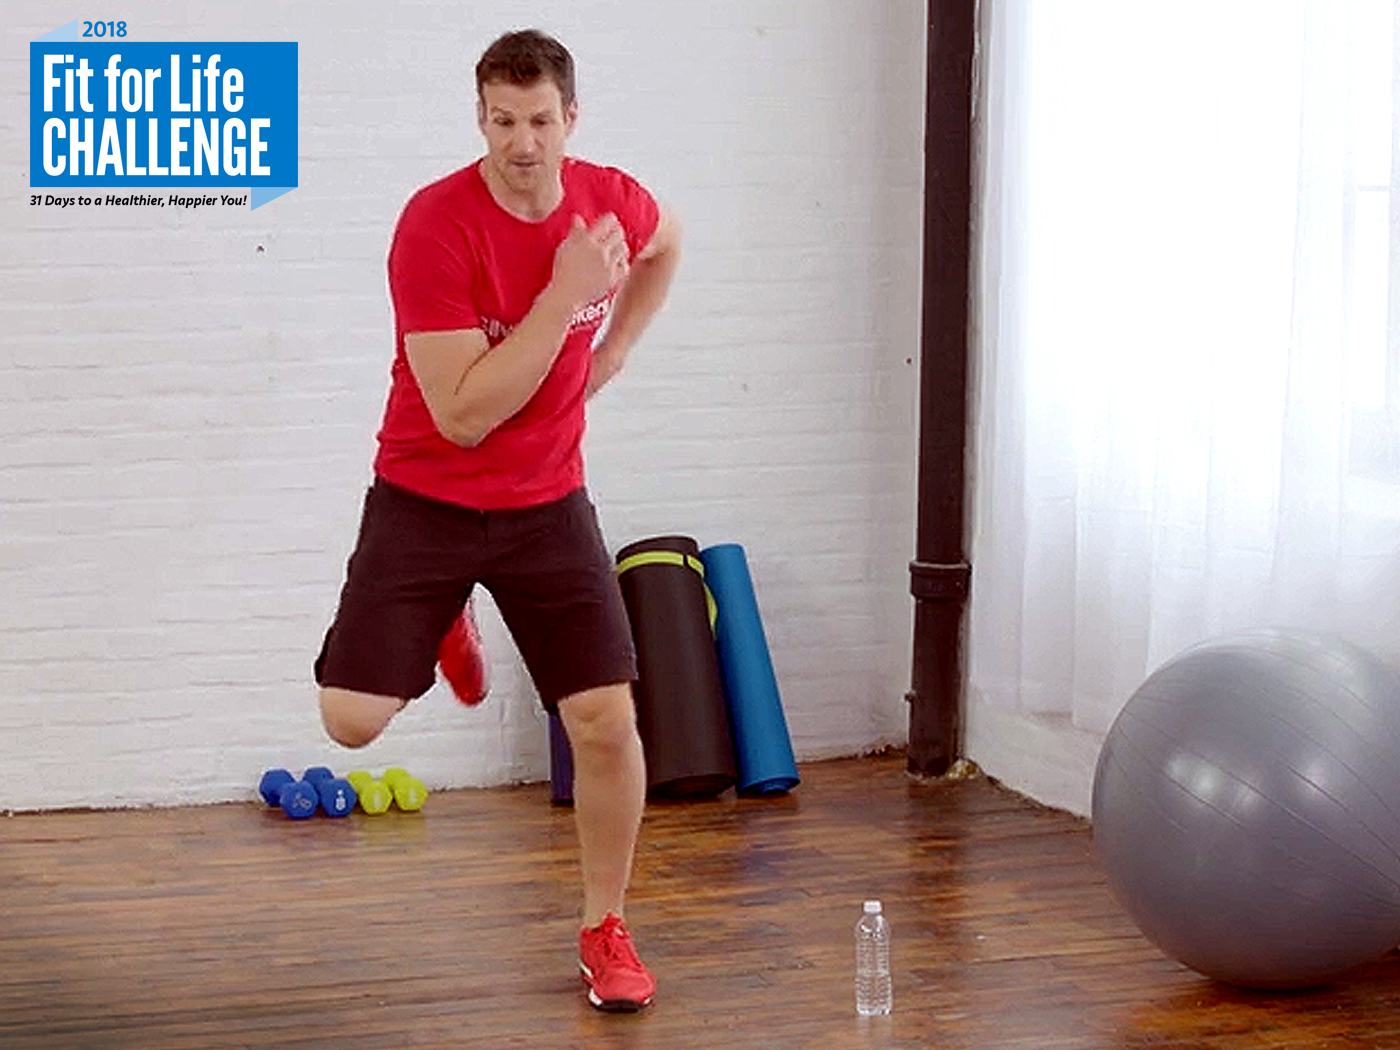 Your Daily Workout: 8-Minute Cardio Flow and Go